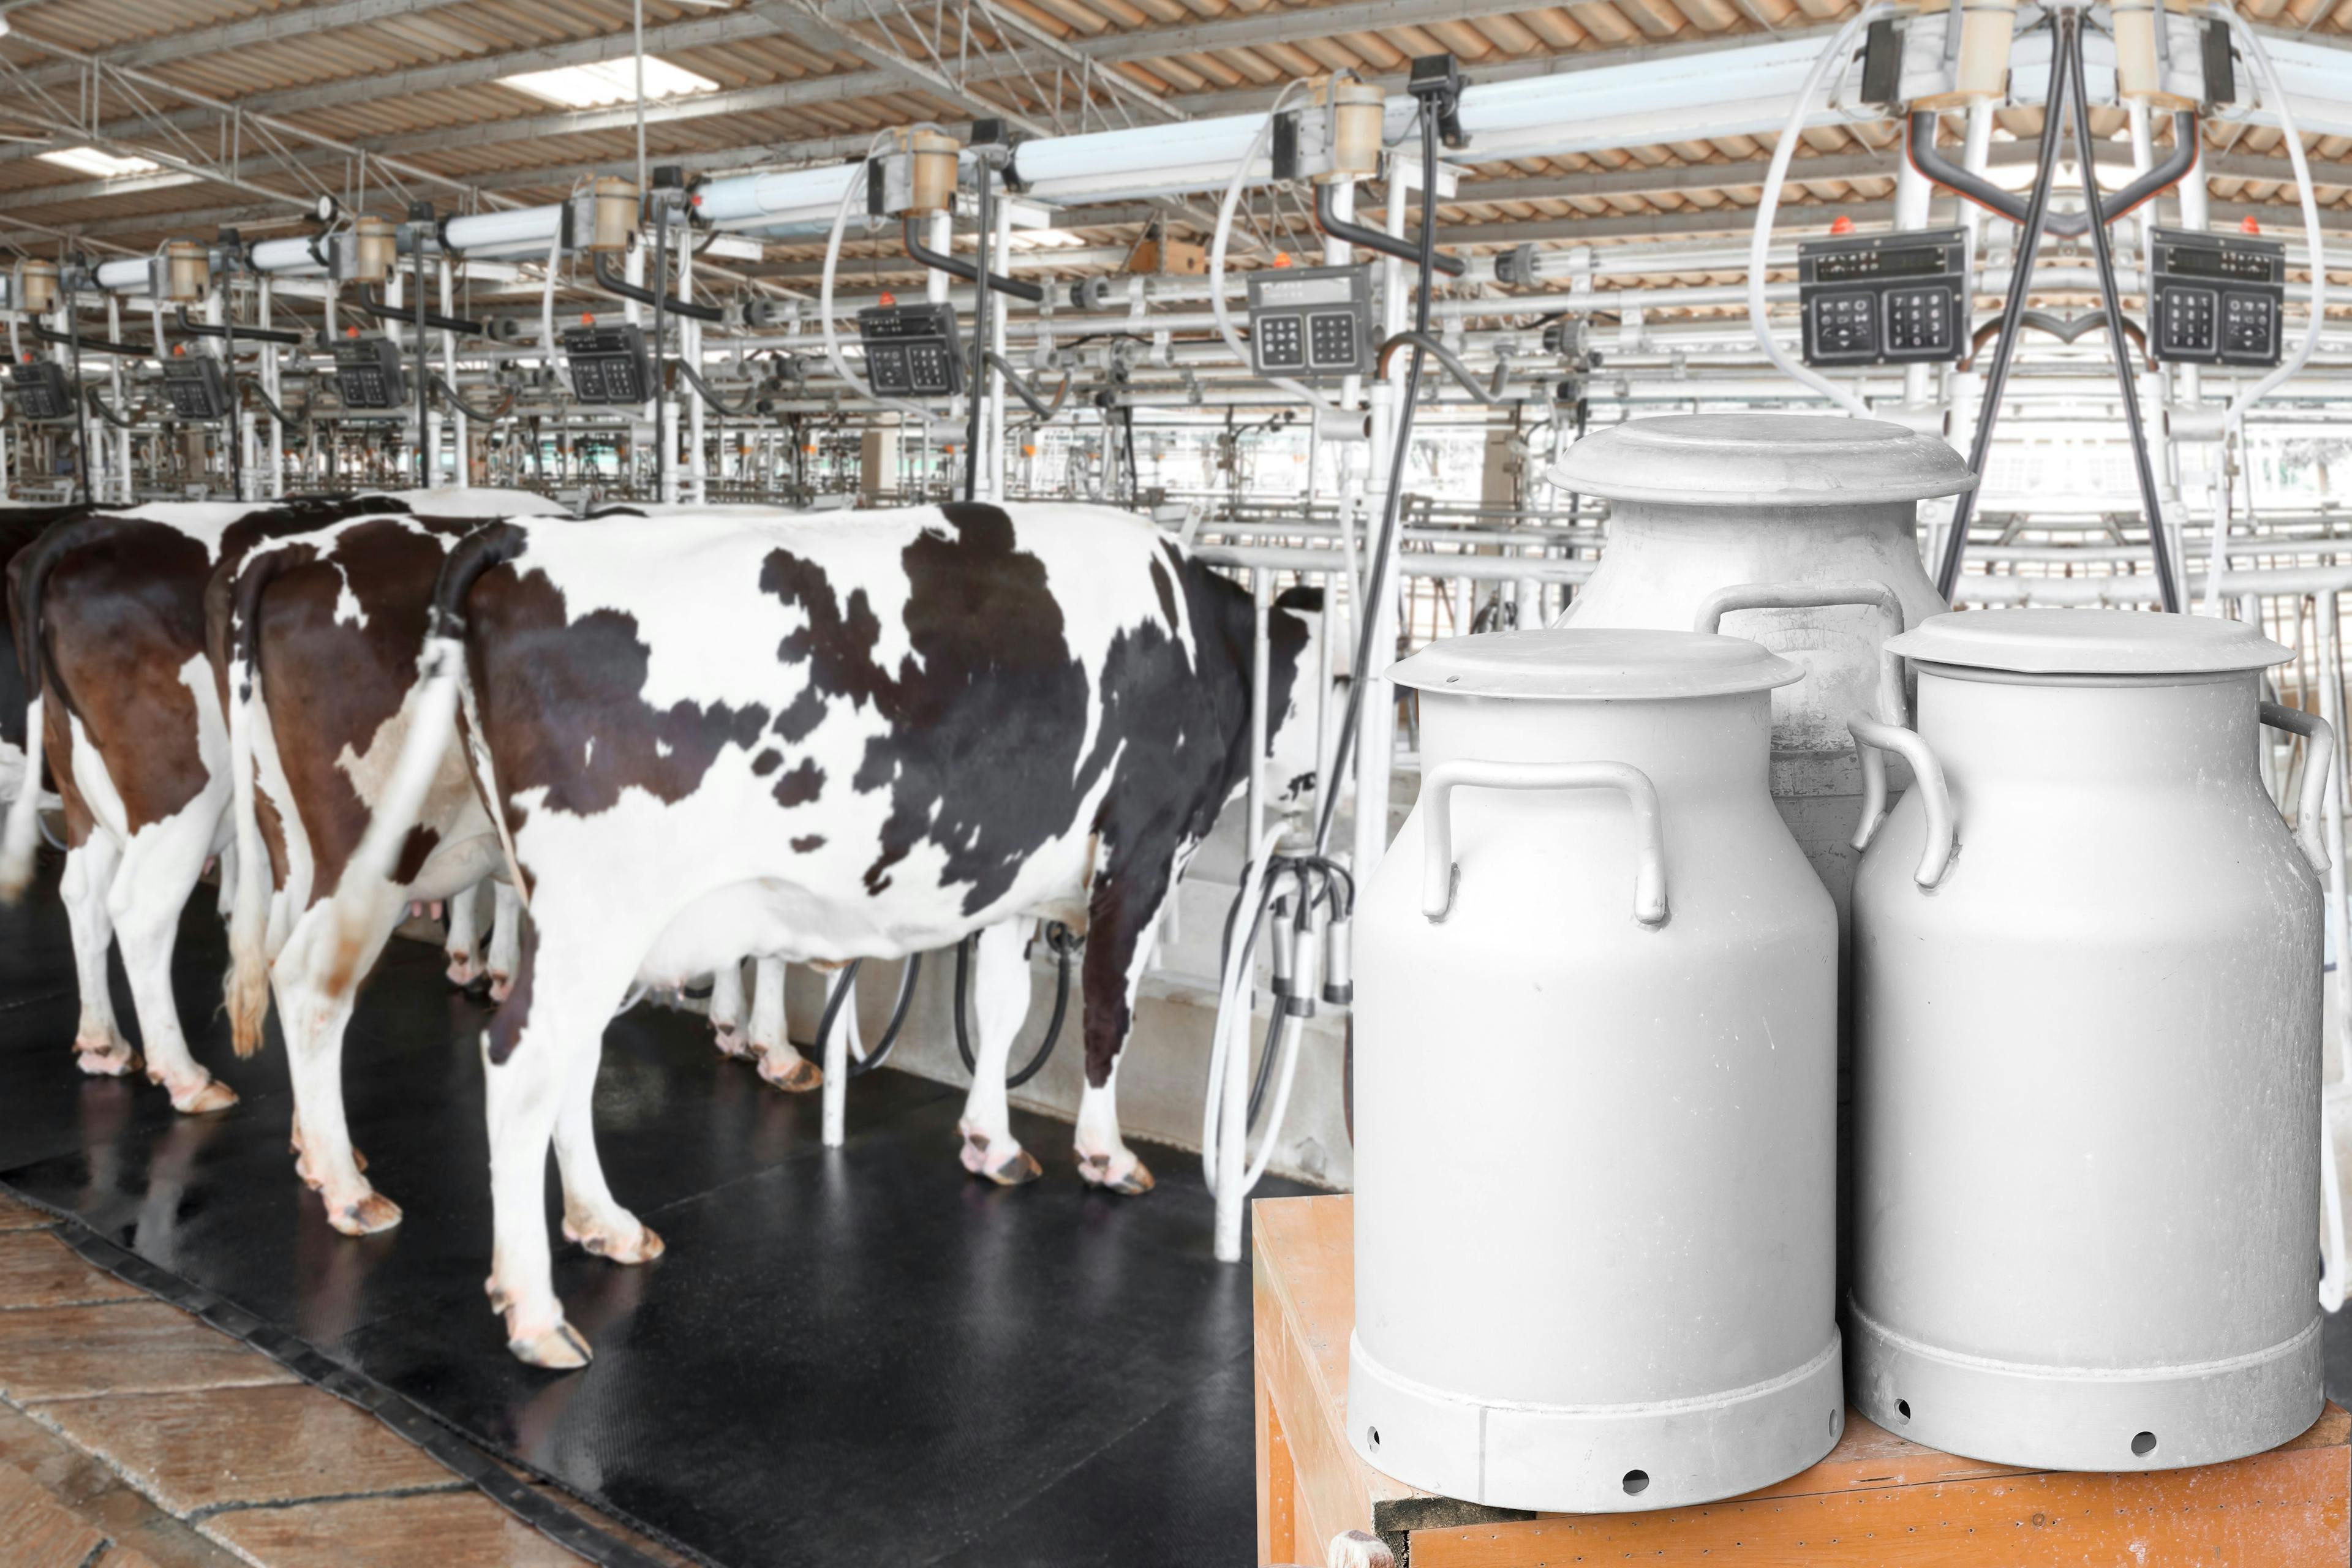 Can container milk with cow milking facility and mechanized milking equipment in the milking hall | Image Credit: © thanapun - stock.adobe.com